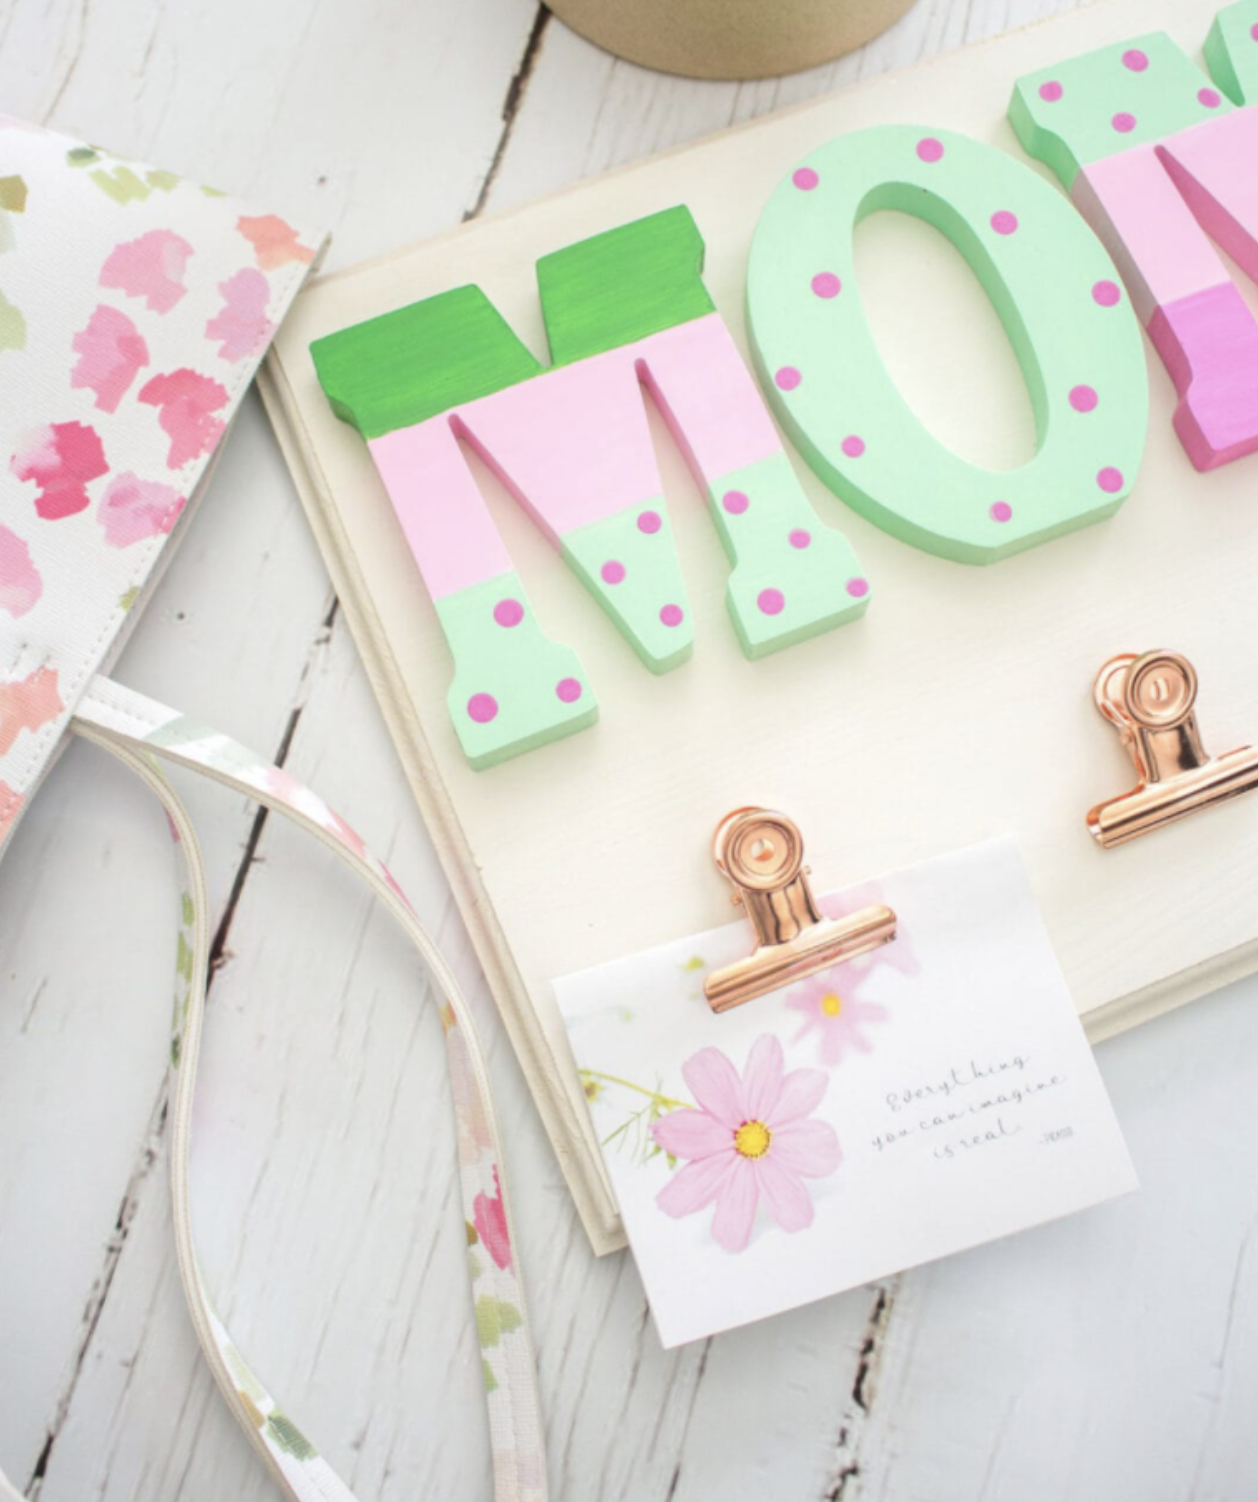 Easy DIY Gifts For Mom From Kids - Clever DIY Ideas | Diy gifts for mom,  Easy diy gifts, Christmas gifts for aunts